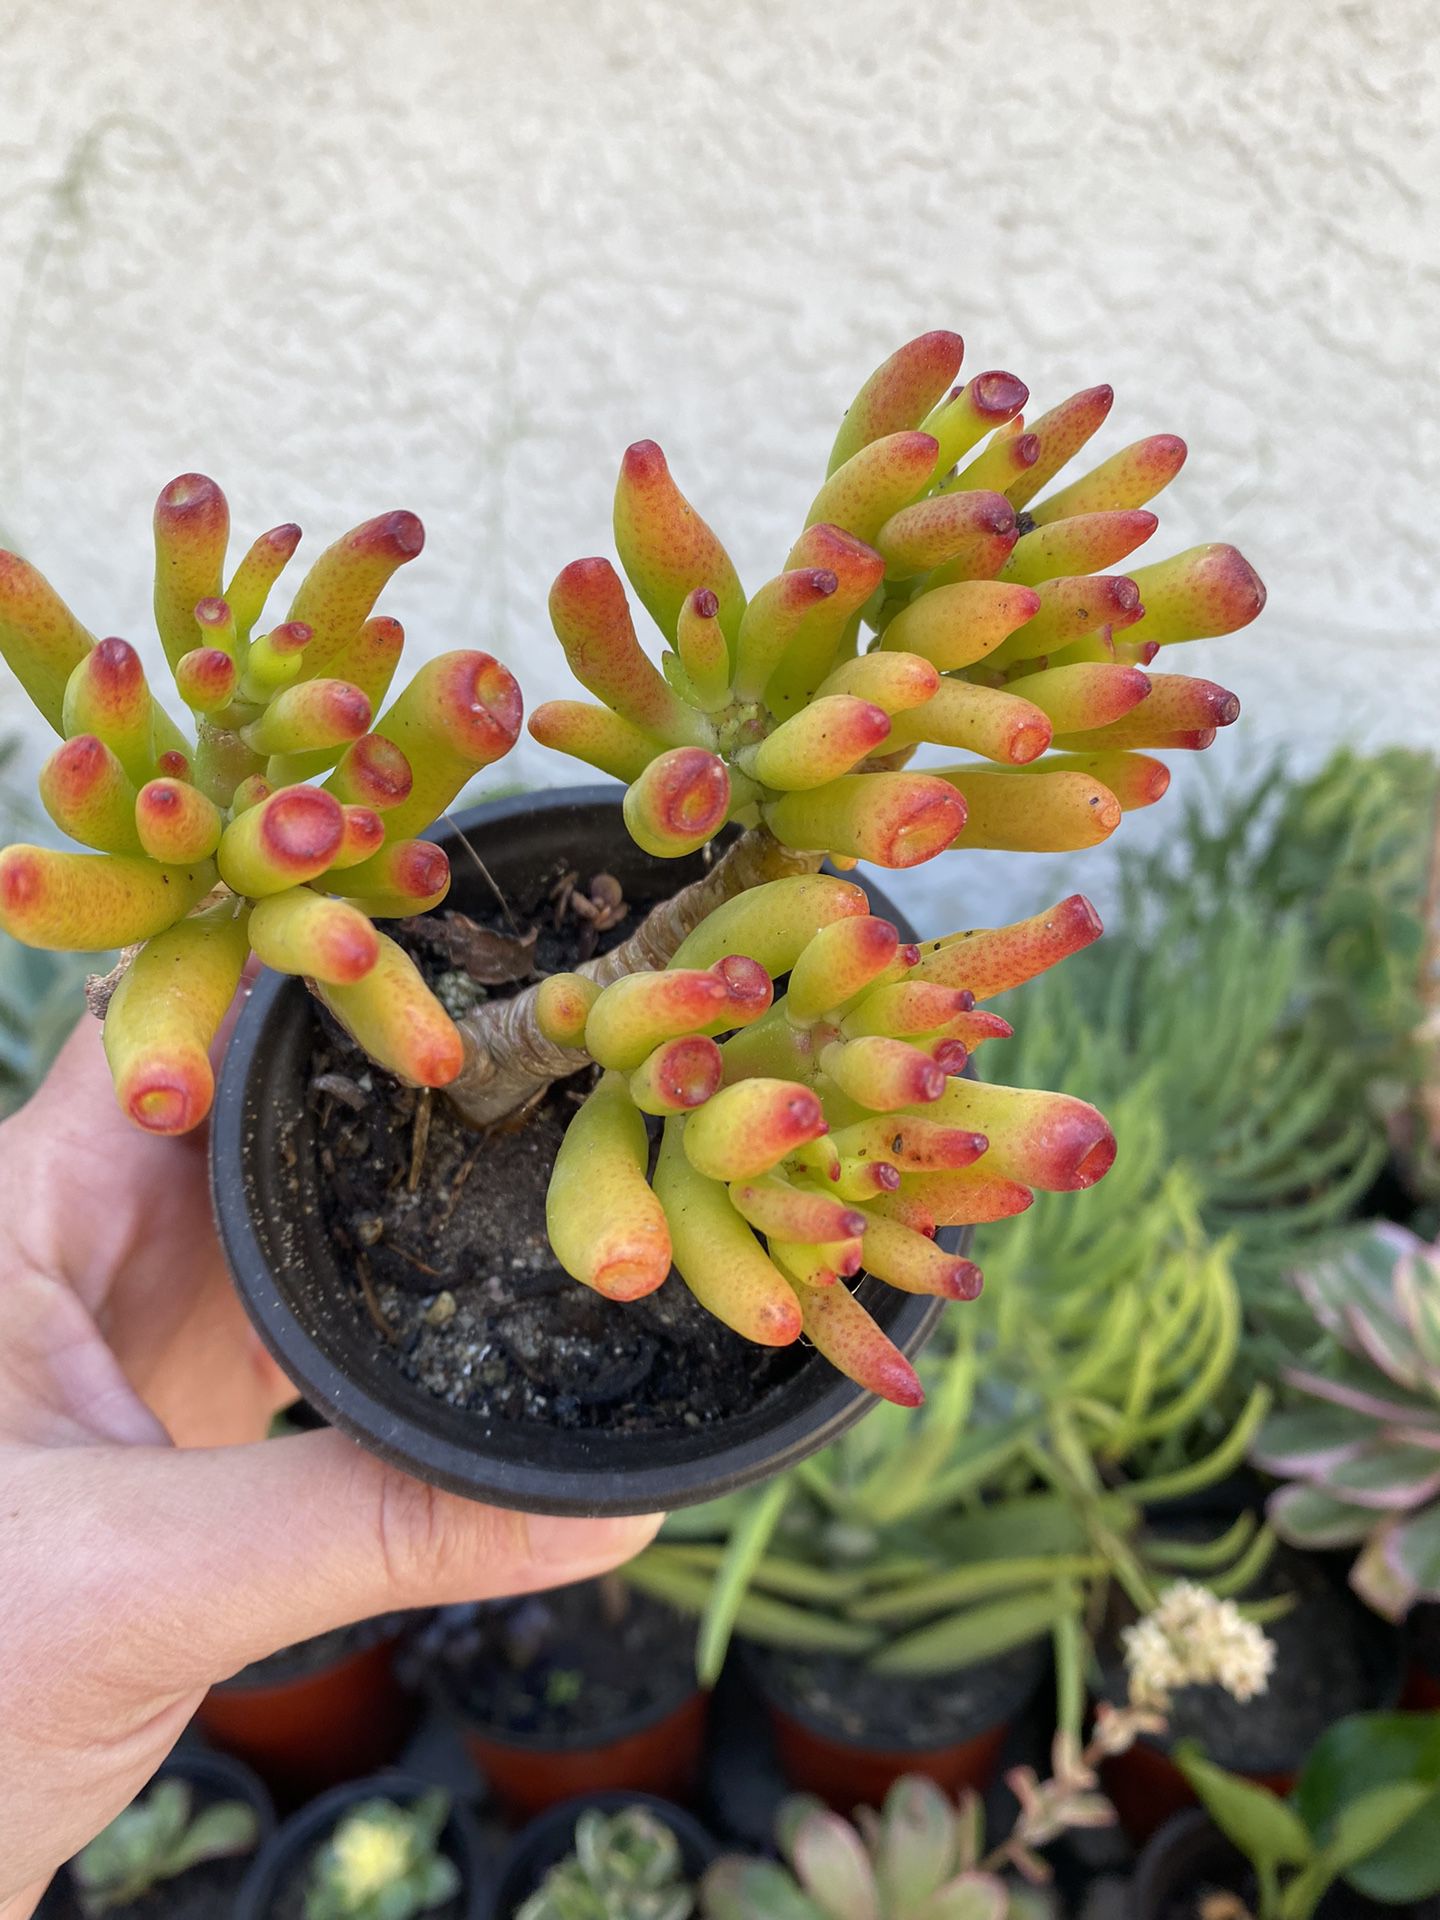 3 Inch Pot Succulent Plant - Jelly Beam Sedum Rubrotictum - rotted starter ready to plant 